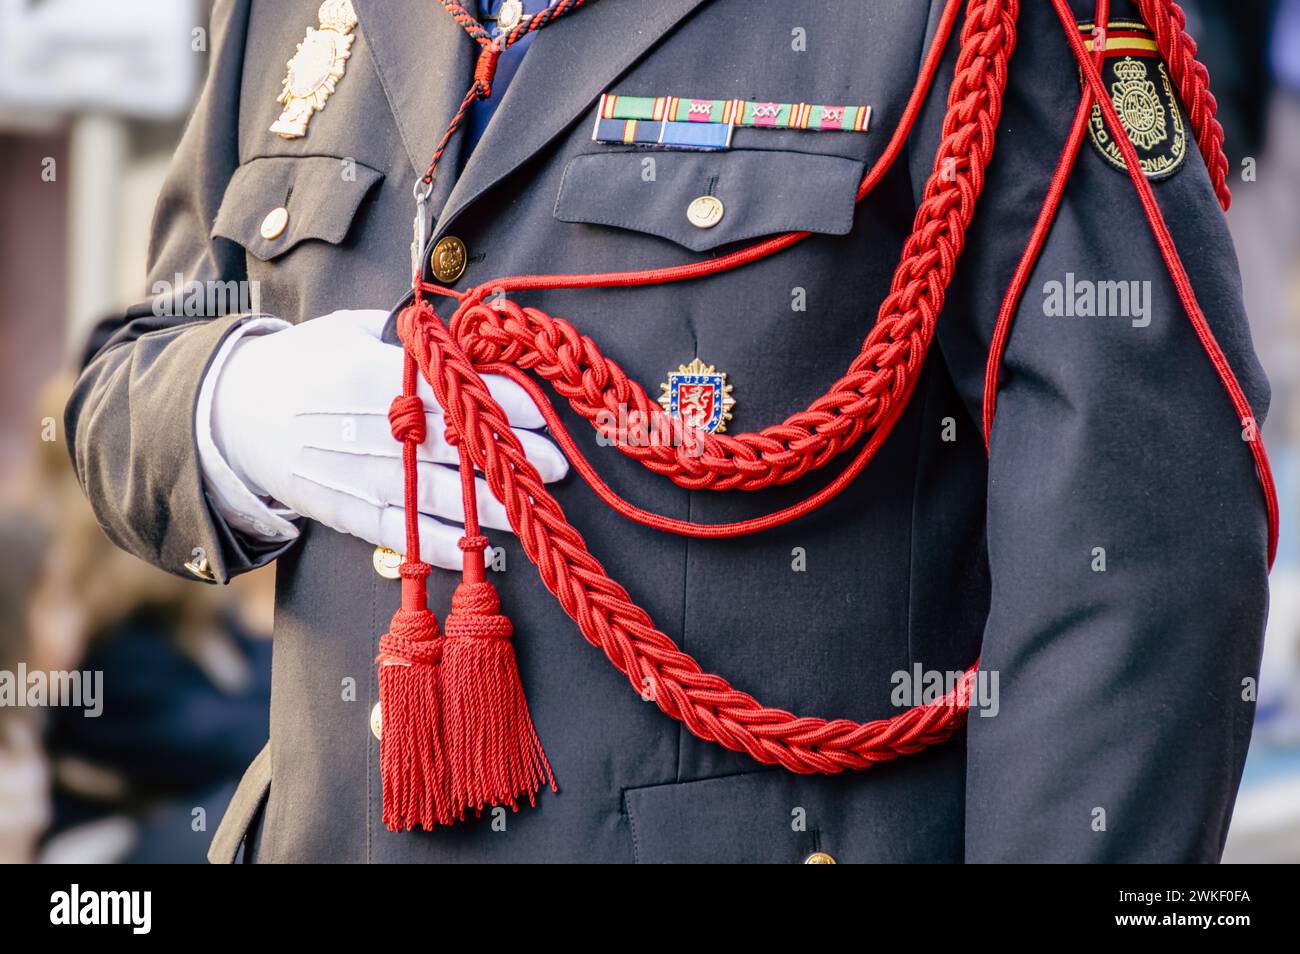 Valladolid, Spain, April 6th 2023: A solemn moment: Detail of an officer’s uniform during Valladolid’s Holy Week Procession Stock Photo